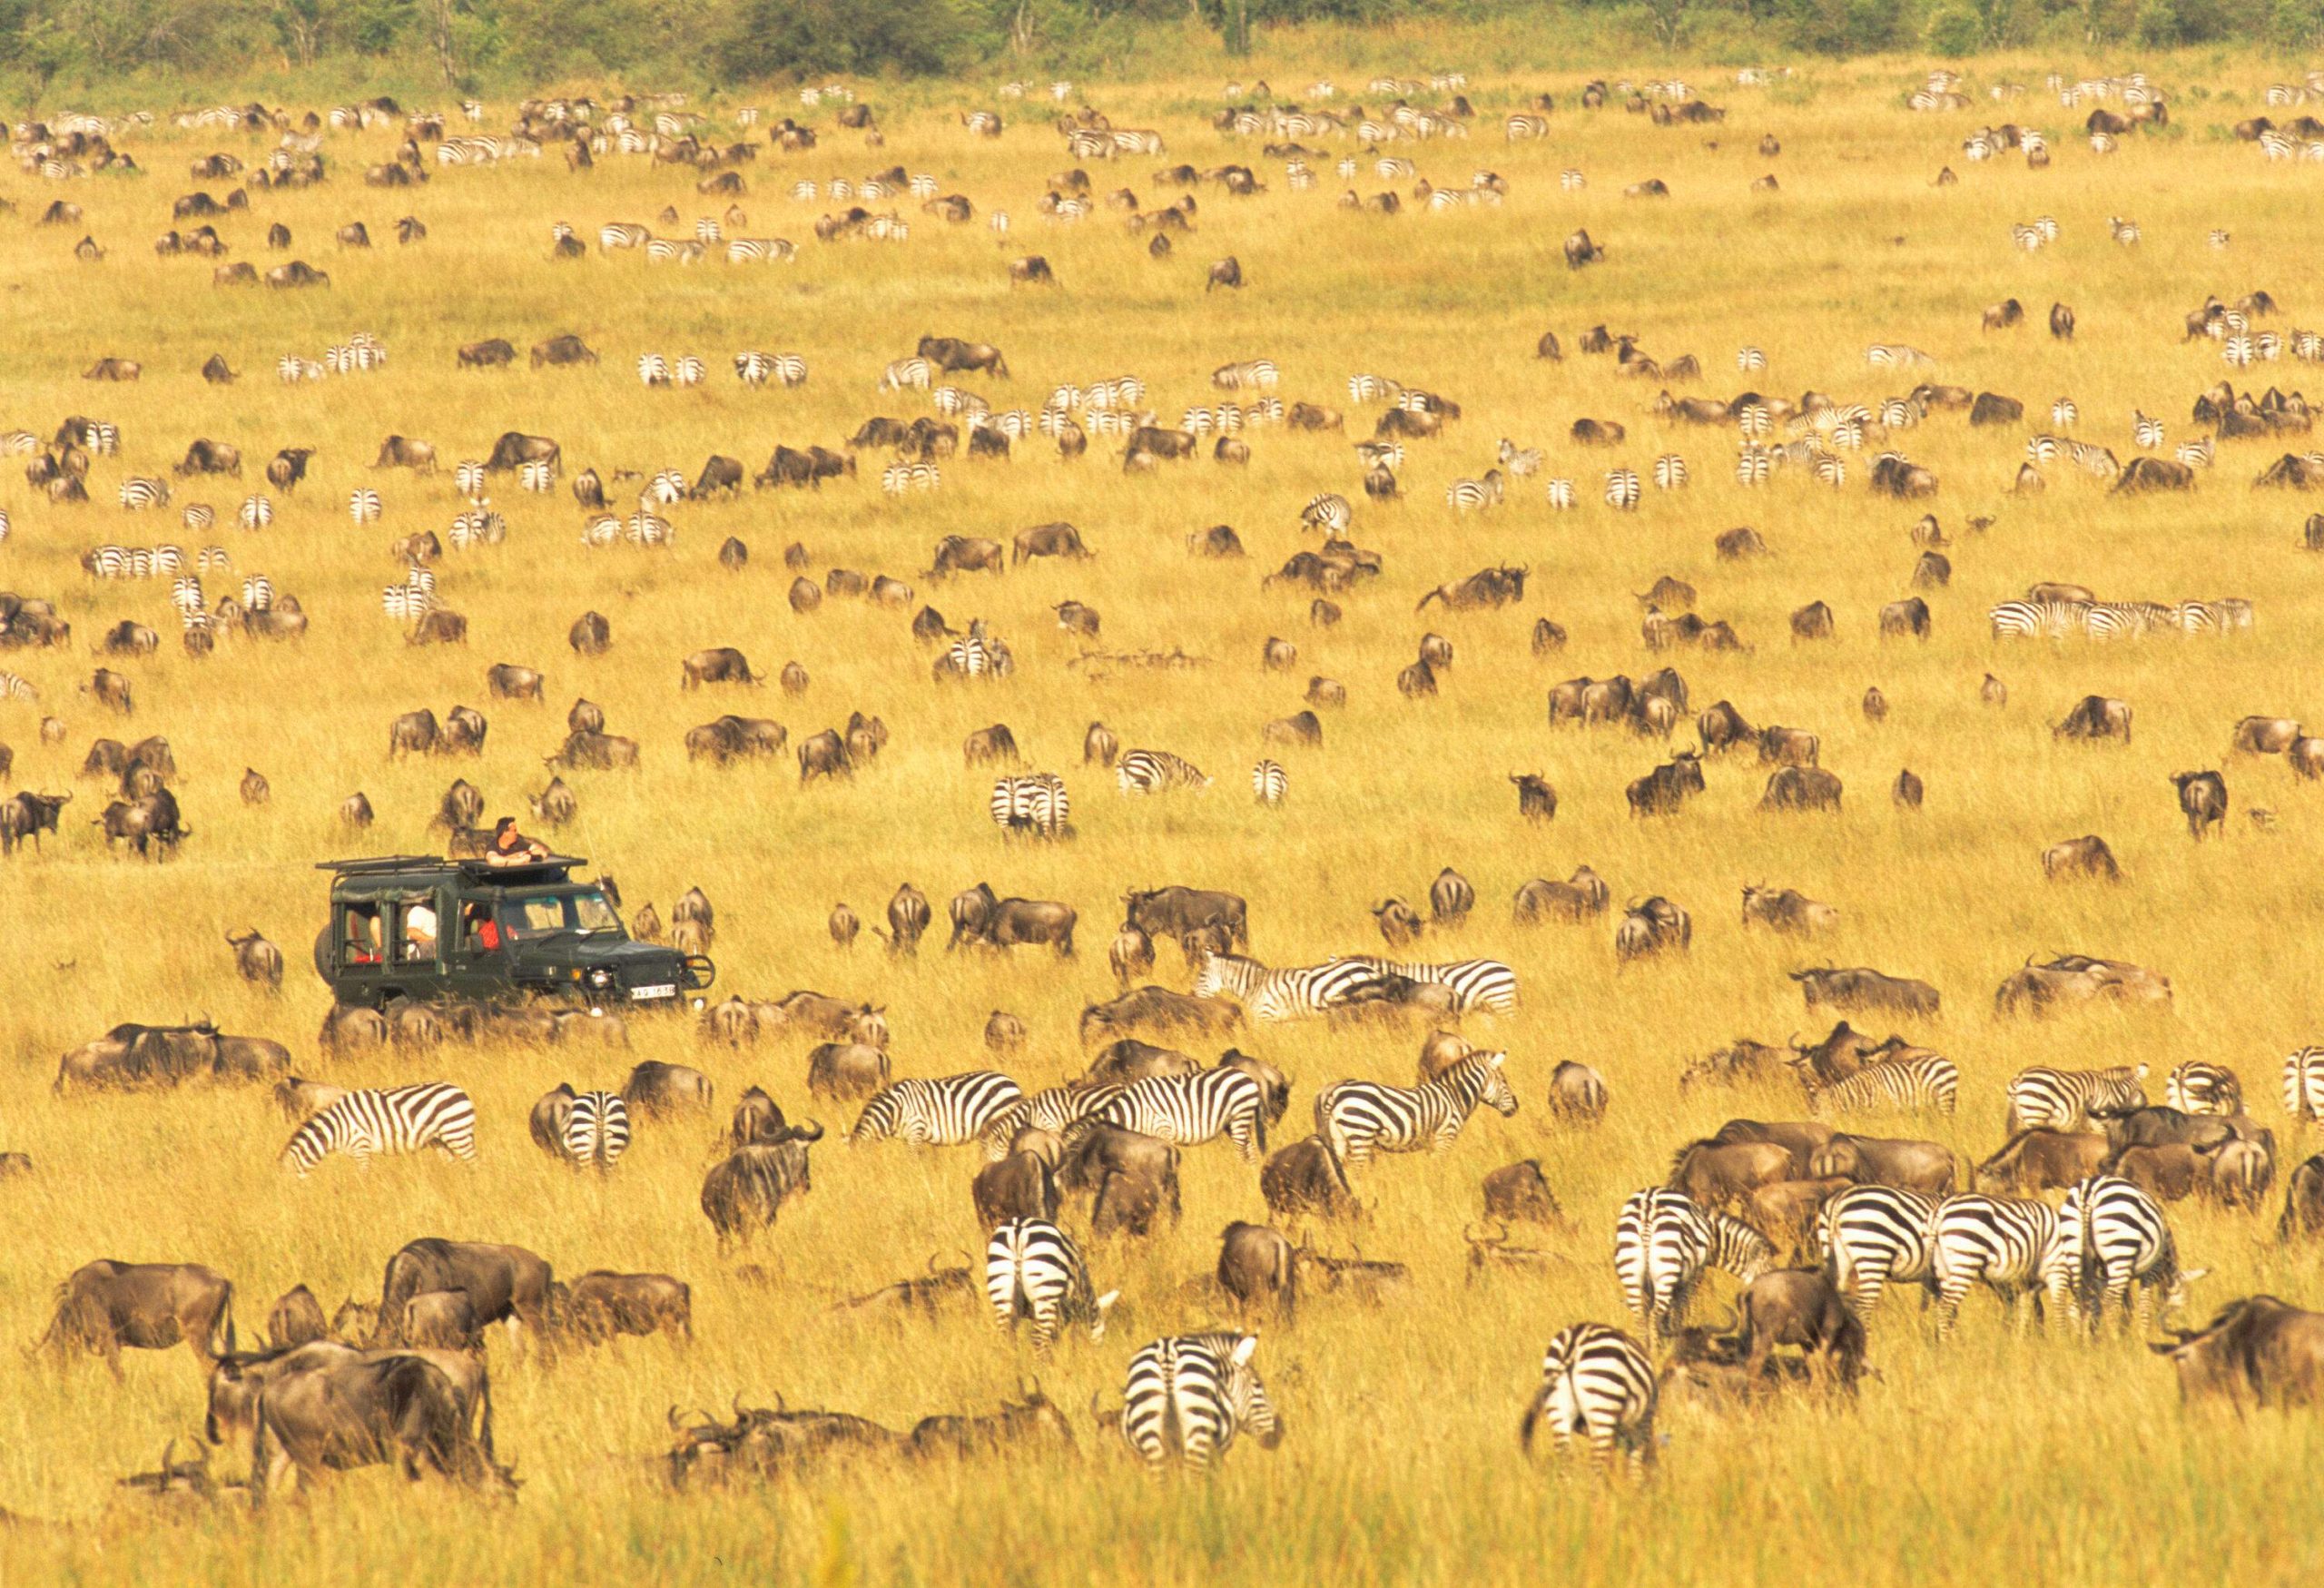 Tourists in a Land Cruiser observe with excitement as wildebeests and zebras roam the vast grasslands, creating a quintessential African safari experience.